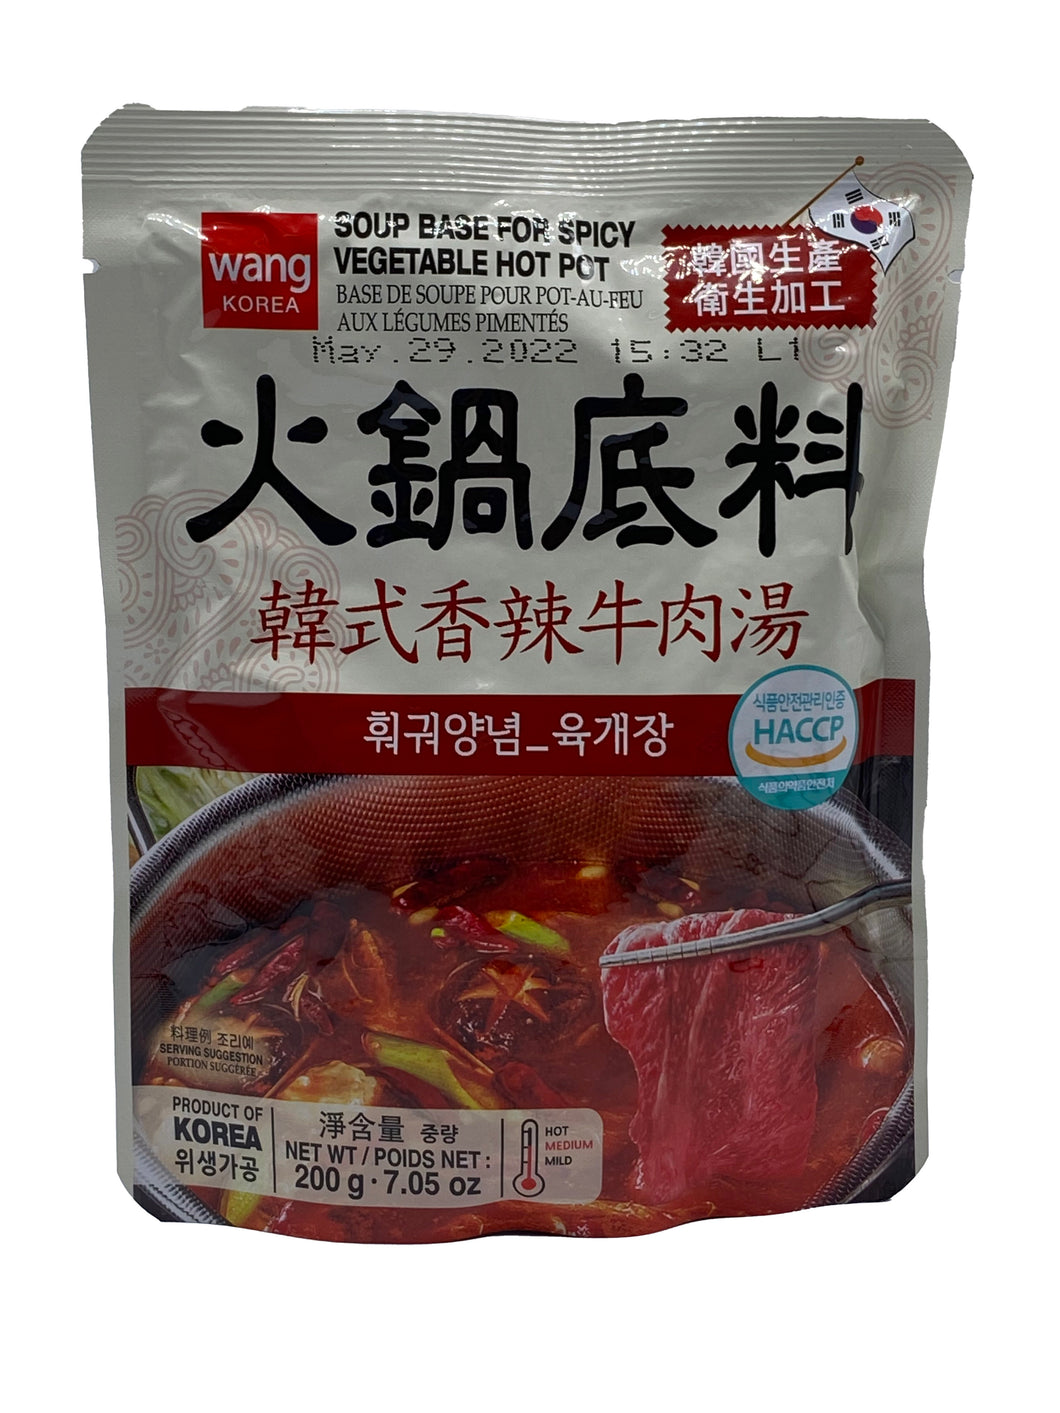 Wang Soup Base for Spicy Vegetable Hot Pot